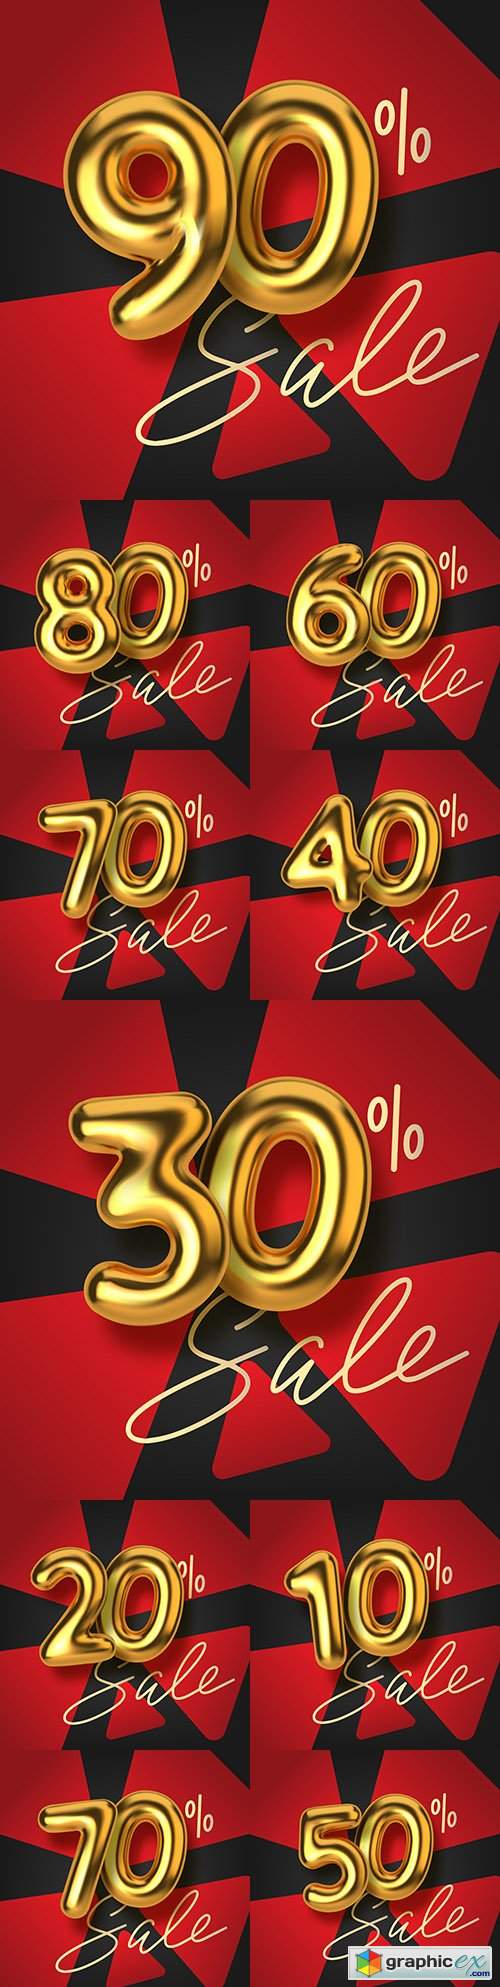  Promotion discount from realistic 3d gold text balloons 